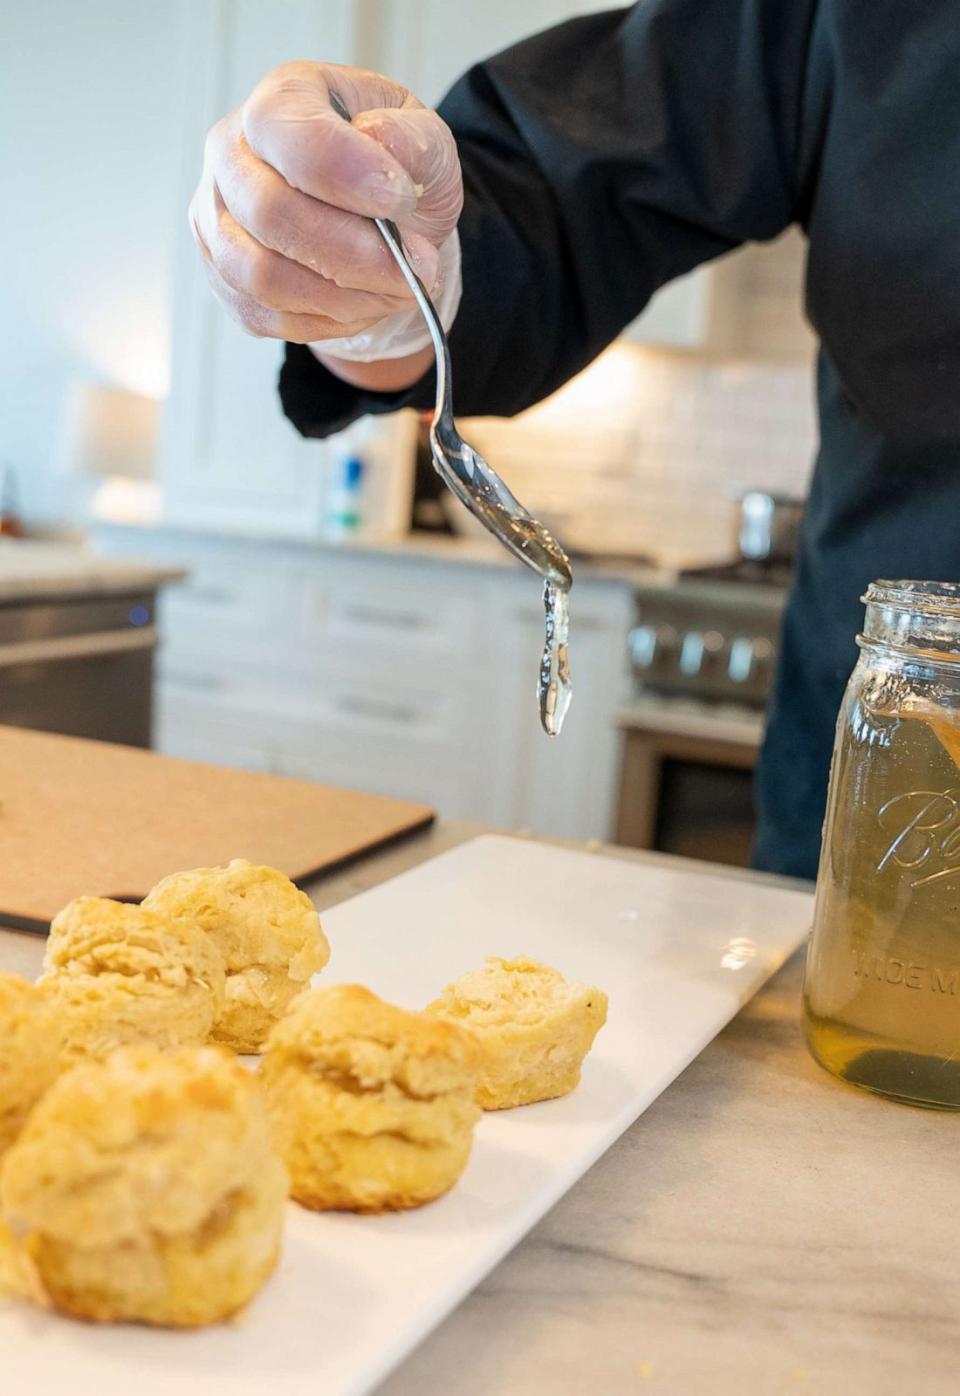 PHOTO: Lemonade-infused jam drizzled on homemade biscuits. (Julie Florio)